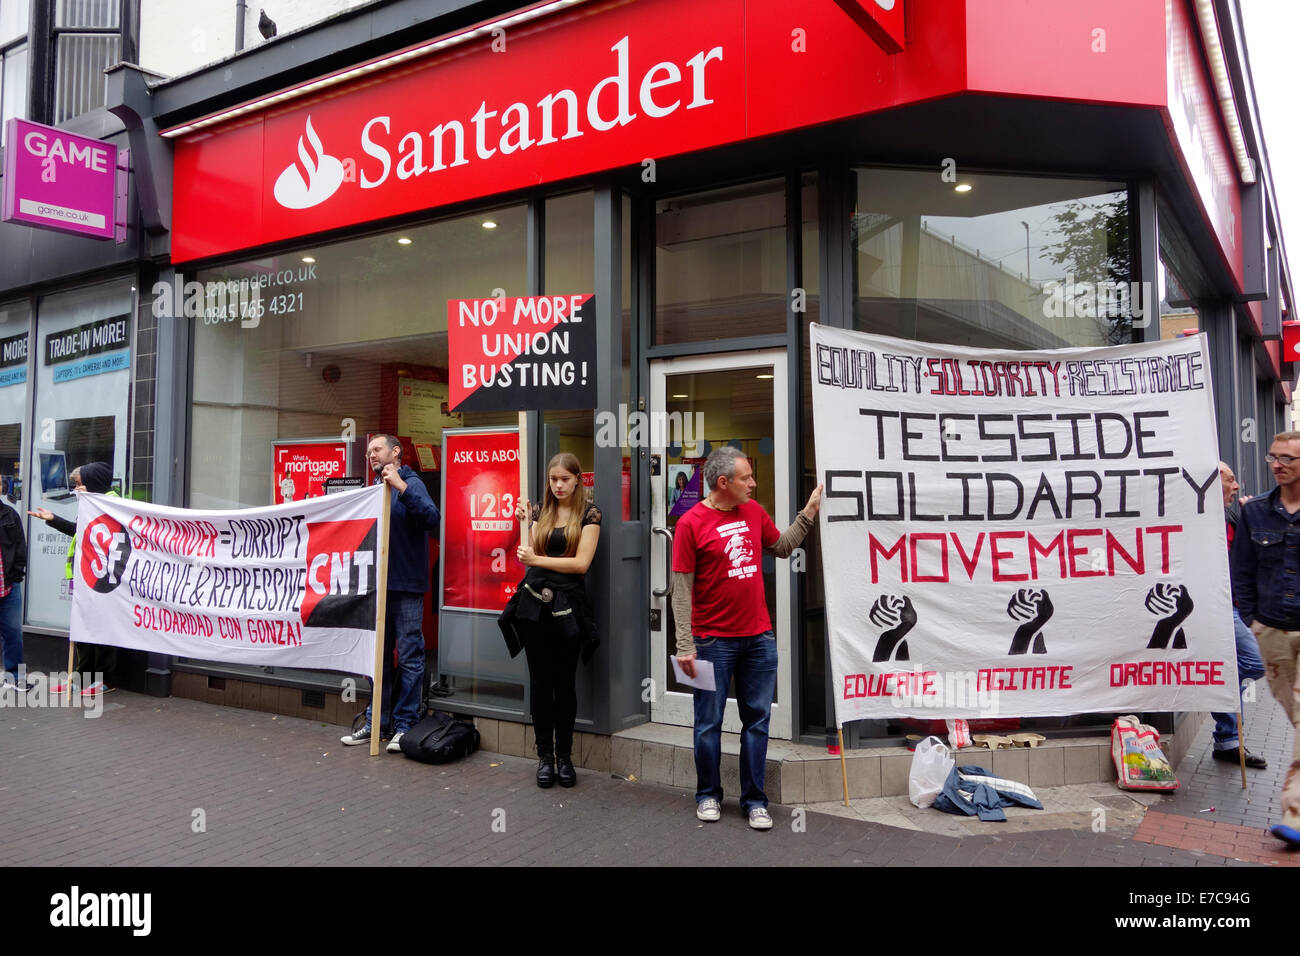 Middlesbrough Cleveland, UK. 13th Sep, 2014. Union protesters picketing a branch of Santander Bank in Middlesbrough Cleveland UK. They are part of a world-wide protest by unions in the IWA, International Workers Association, against the sacking of a Union Militant Activist from an outsourced company working for Santander in Spain. Protesters are asking sympathetic members of the public to complain to Santander Bank customer services. Credit:  Peter Jordan NE/Alamy Live News Stock Photo